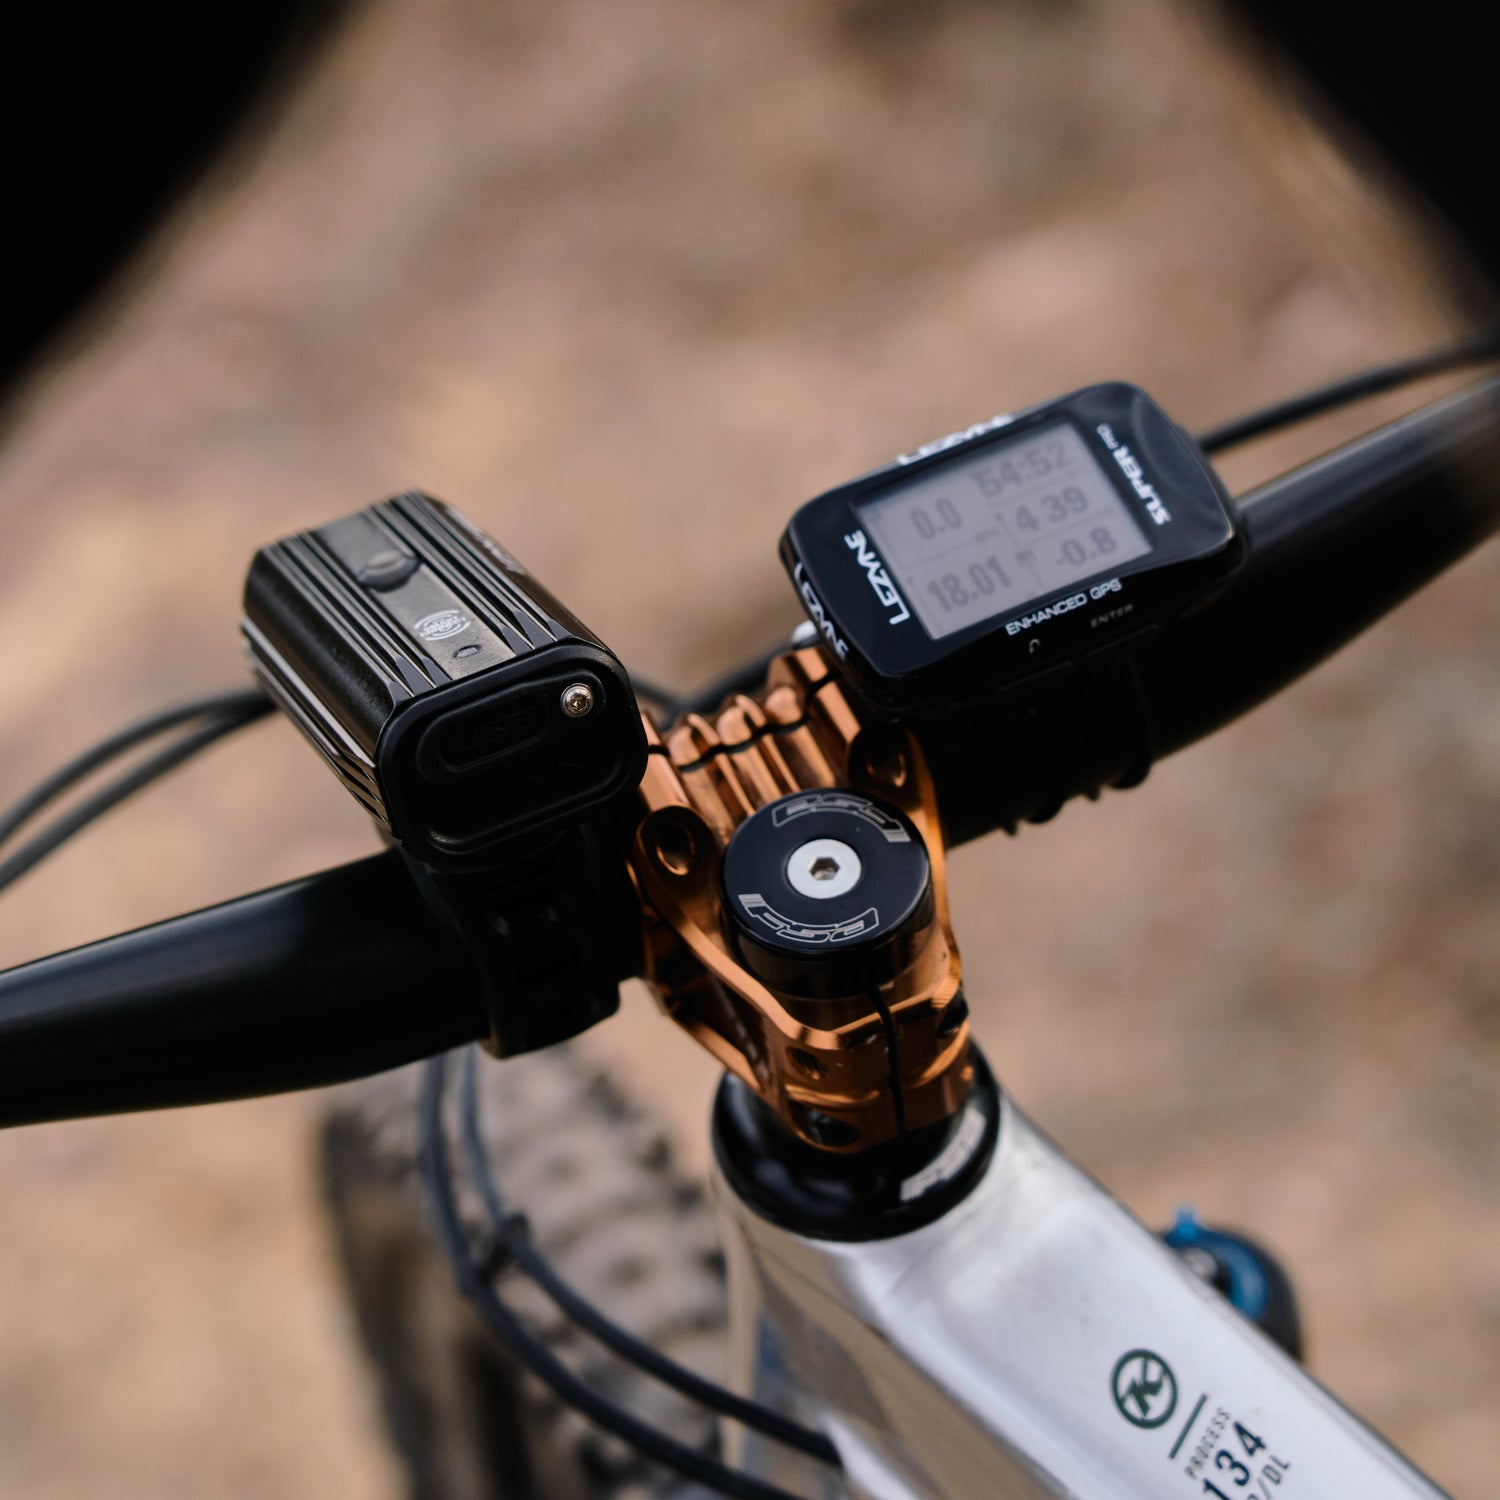 Lezyne Super Pro GPS attached to handlebars with GPS O-Ring Mount Kit